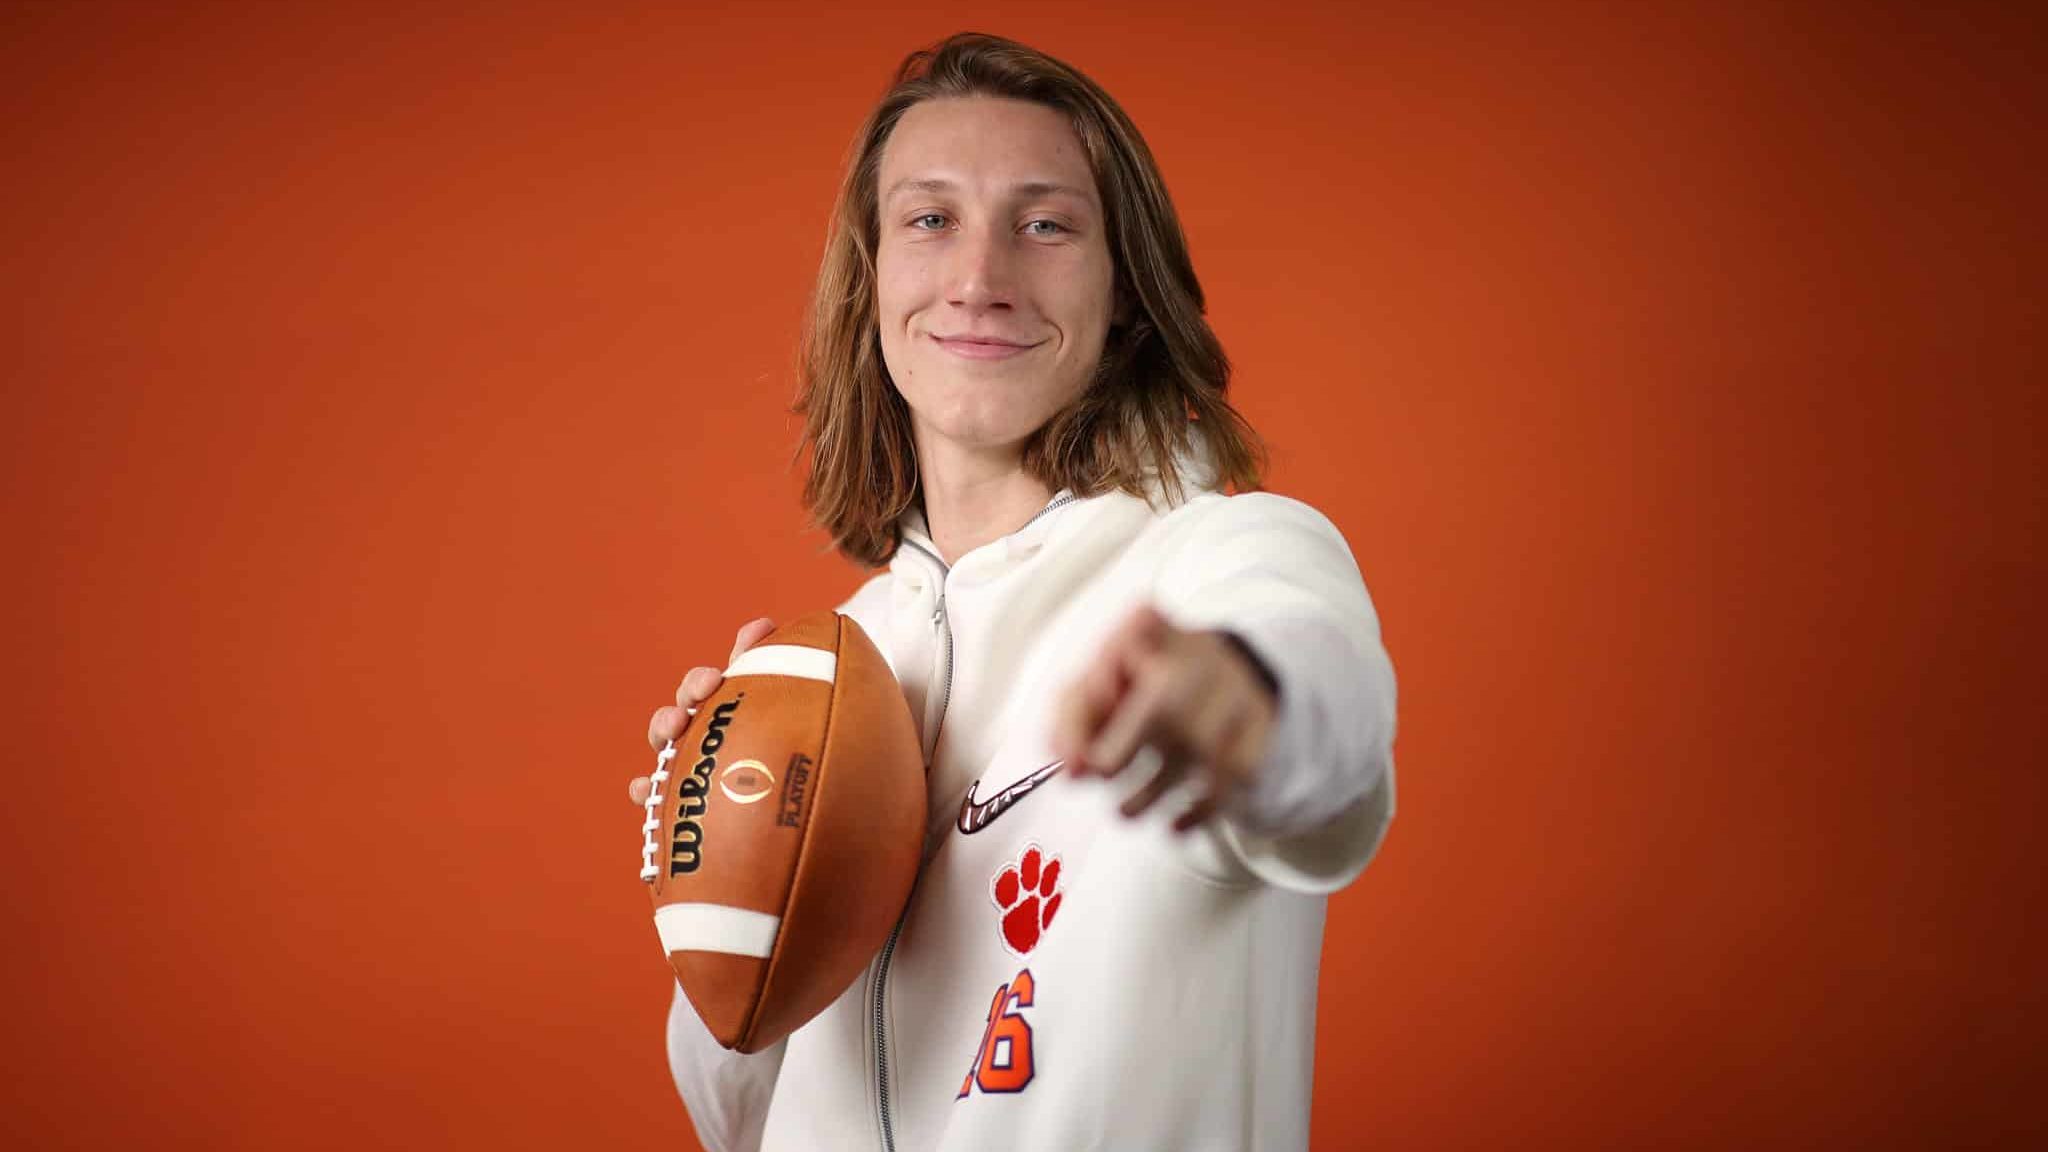 NEW ORLEANS, LOUISIANA - JANUARY 11: Trevor Lawrence #16 of the Clemson Tigers attends media day for the College Football Playoff National Championship on January 11, 2020 in New Orleans, Louisiana.